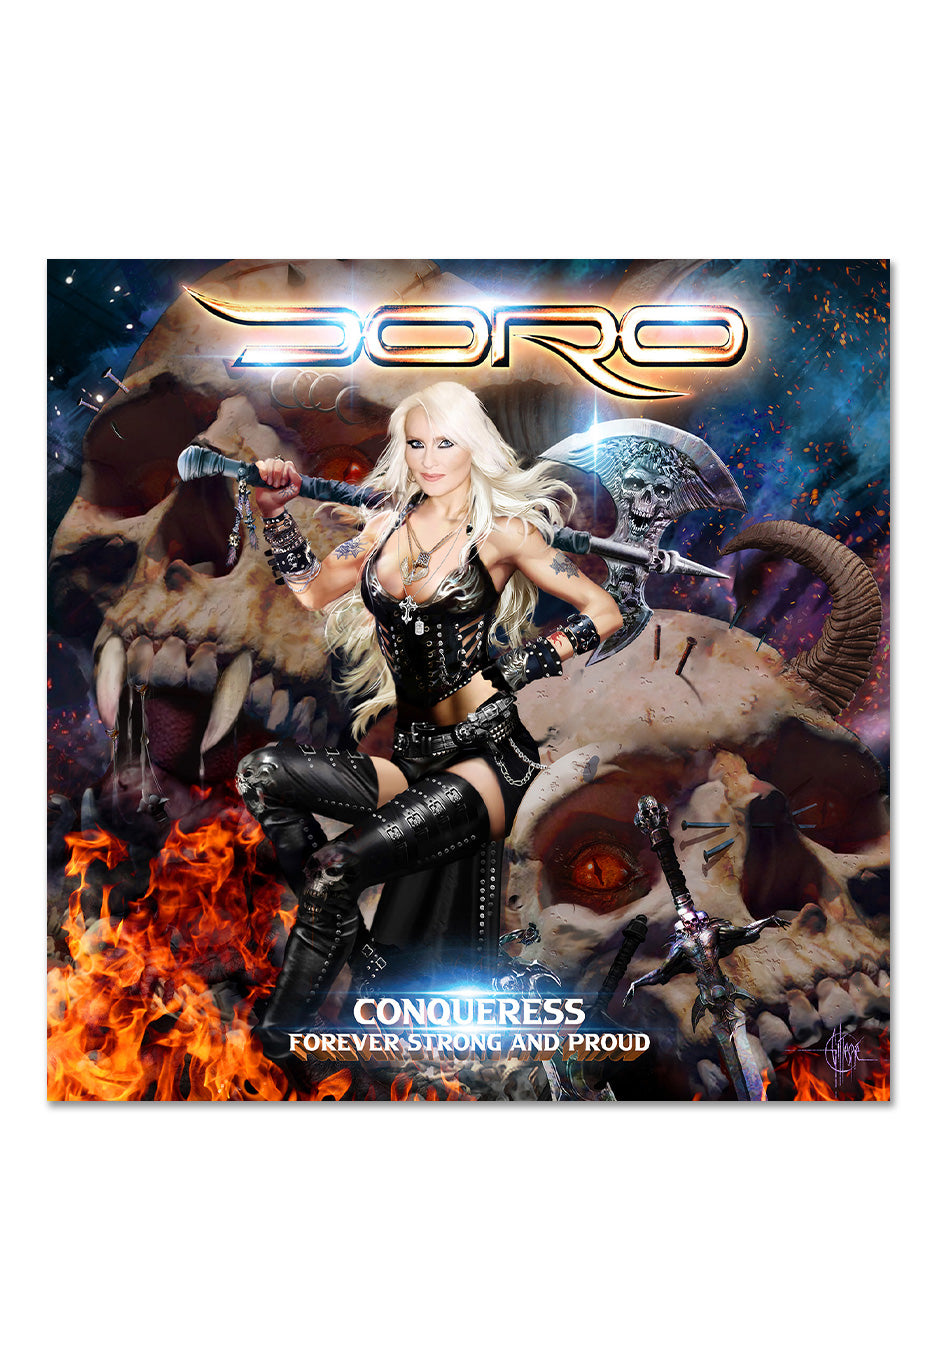 Doro - Conqueress - Forever Strong And Proud - Digibook 2 CD